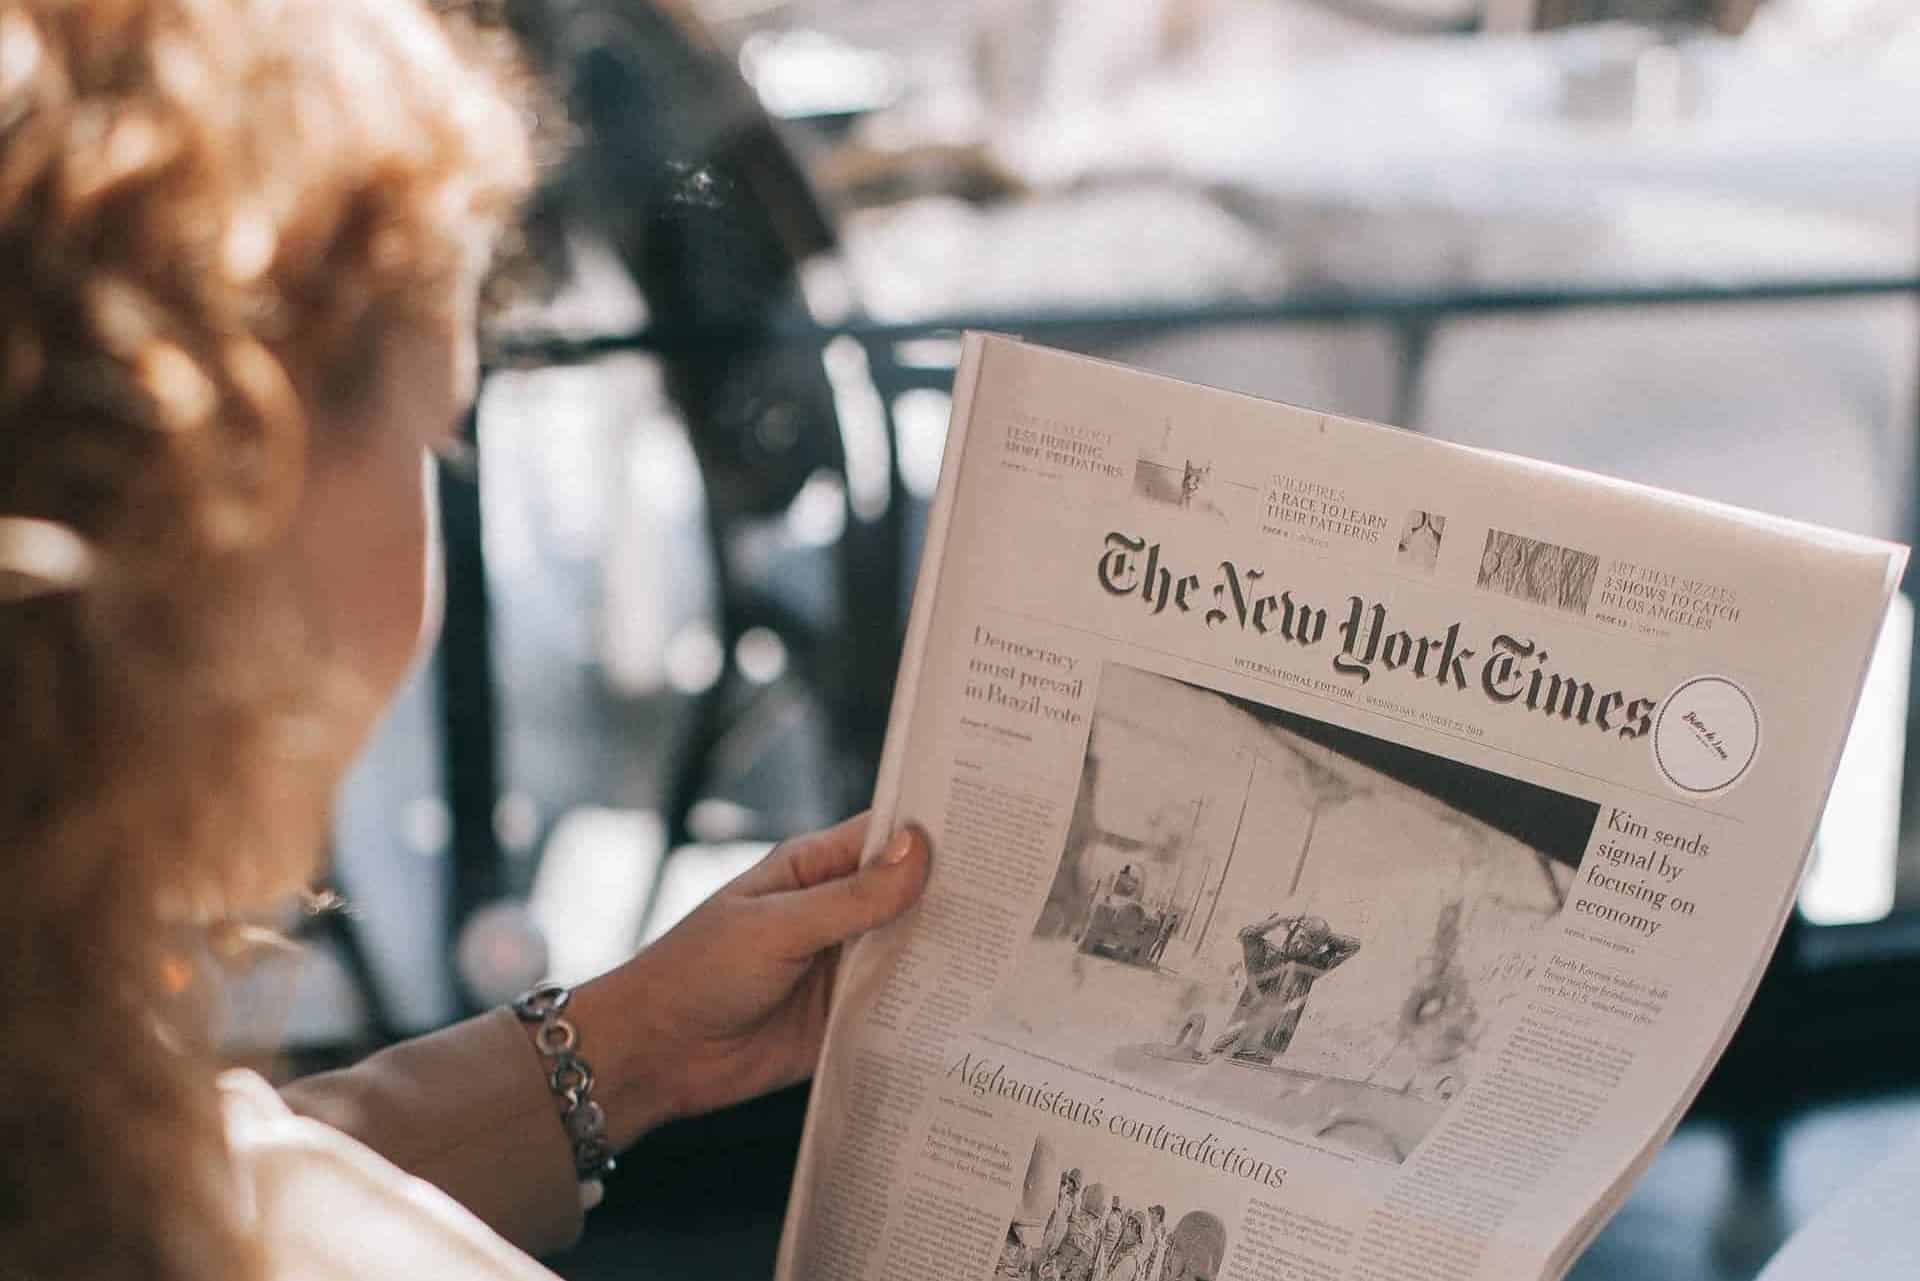 A woman sitting and reading a copy of The New York Times newspaper